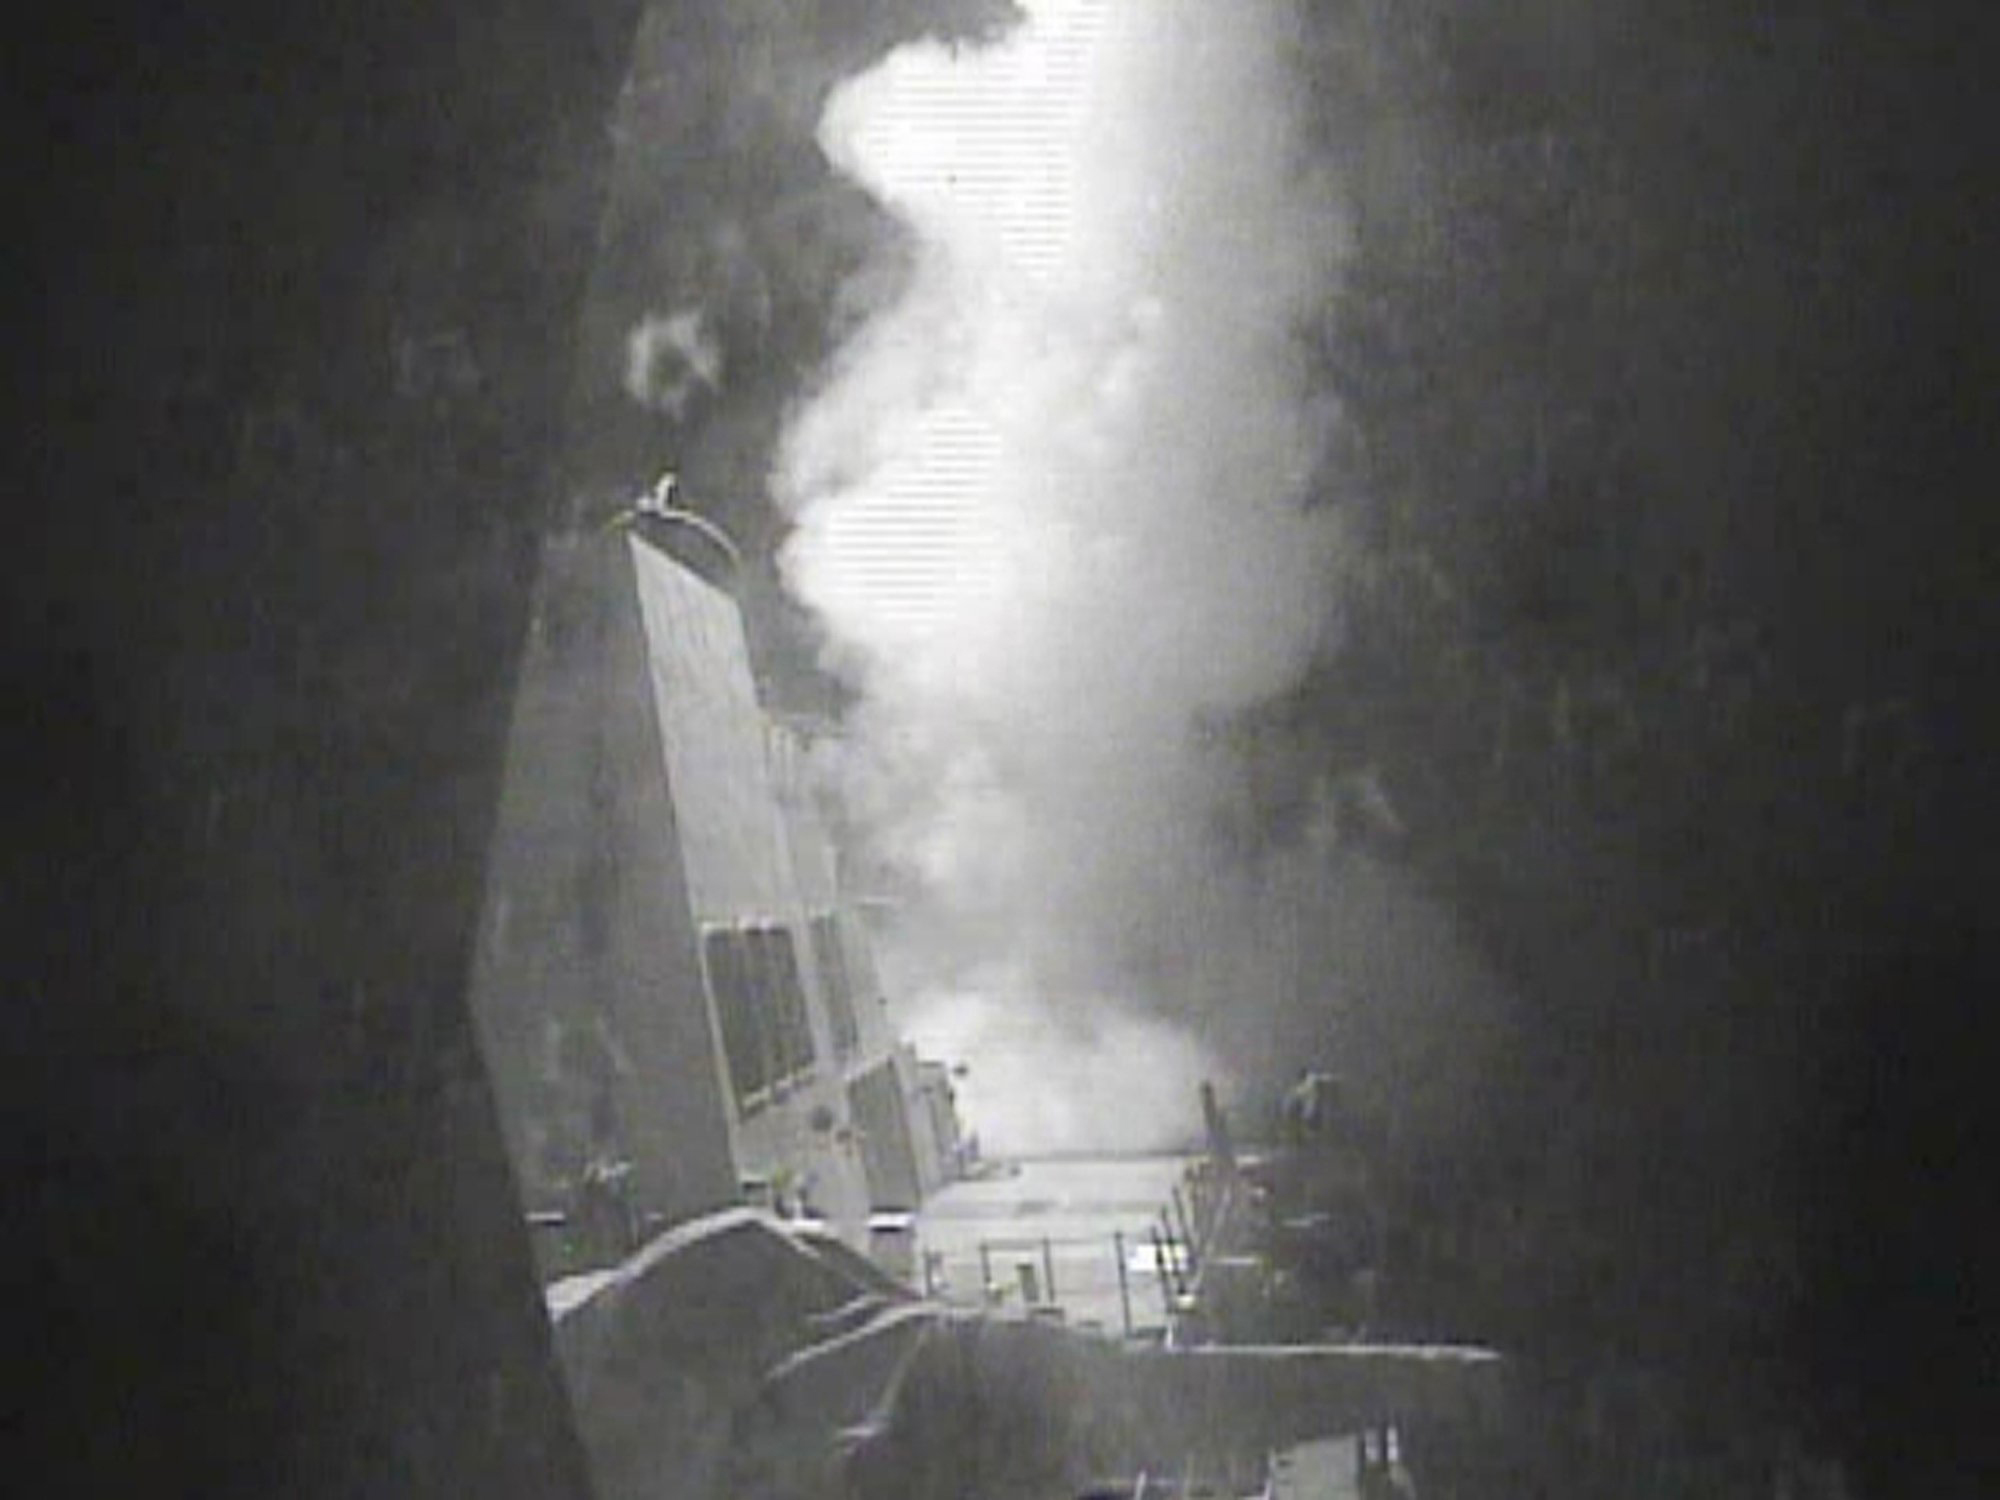 In this Thursday Oct. 13 photo released by U.S. Navy, the guided missile destroyer USS Nitze (DDG 94) launches a strike against coastal sites in Houthi-controlled territory on Yemen's Red Sea coast. U.S.-launched Tomahawk cruise missiles destroyed three coastal radar sites in Houthi-controlled territory on Yemen's Red Sea Coast early Thursday, officials said, a retaliatory action that followed two incidents this week in which missiles were fired at U.S. Navy ships. (U.S. Navy via AP)